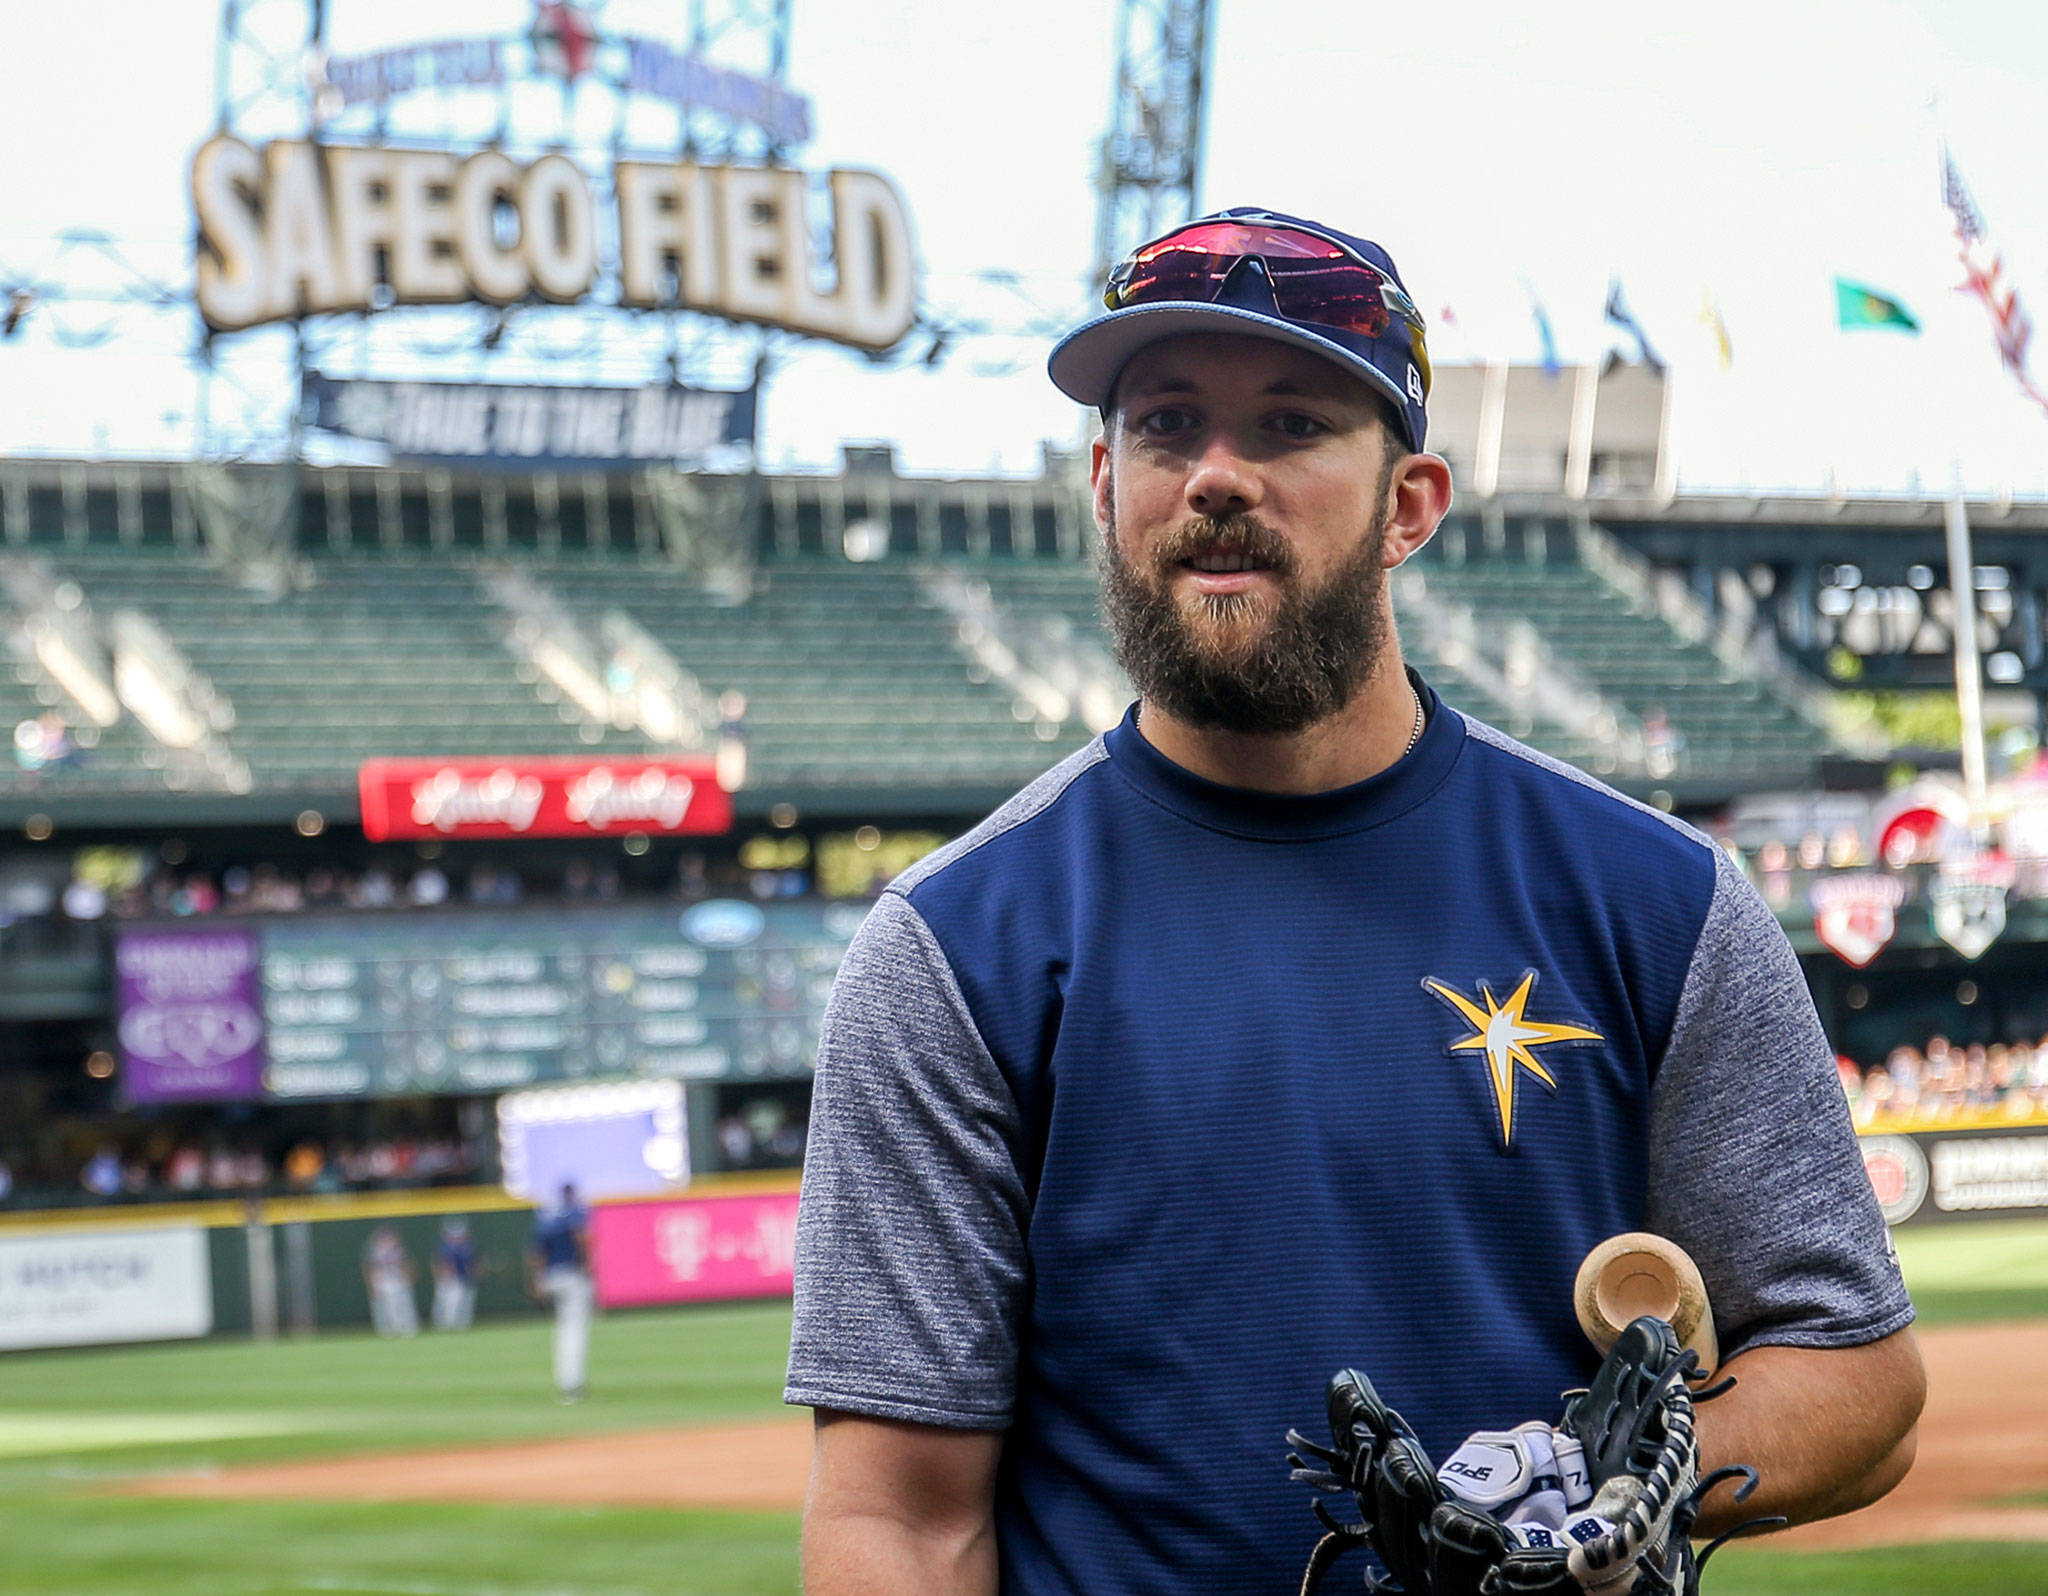 Tampa Bay’s Steven Souza Jr. takes batting practice at Safeco Field before a game against Seattle on June 3, 2017. The Cascade High School alumnus has since been traded to Arizona, but he hit 30 home runs for the Rays in 2017. (Kevin Clark / The Herald)